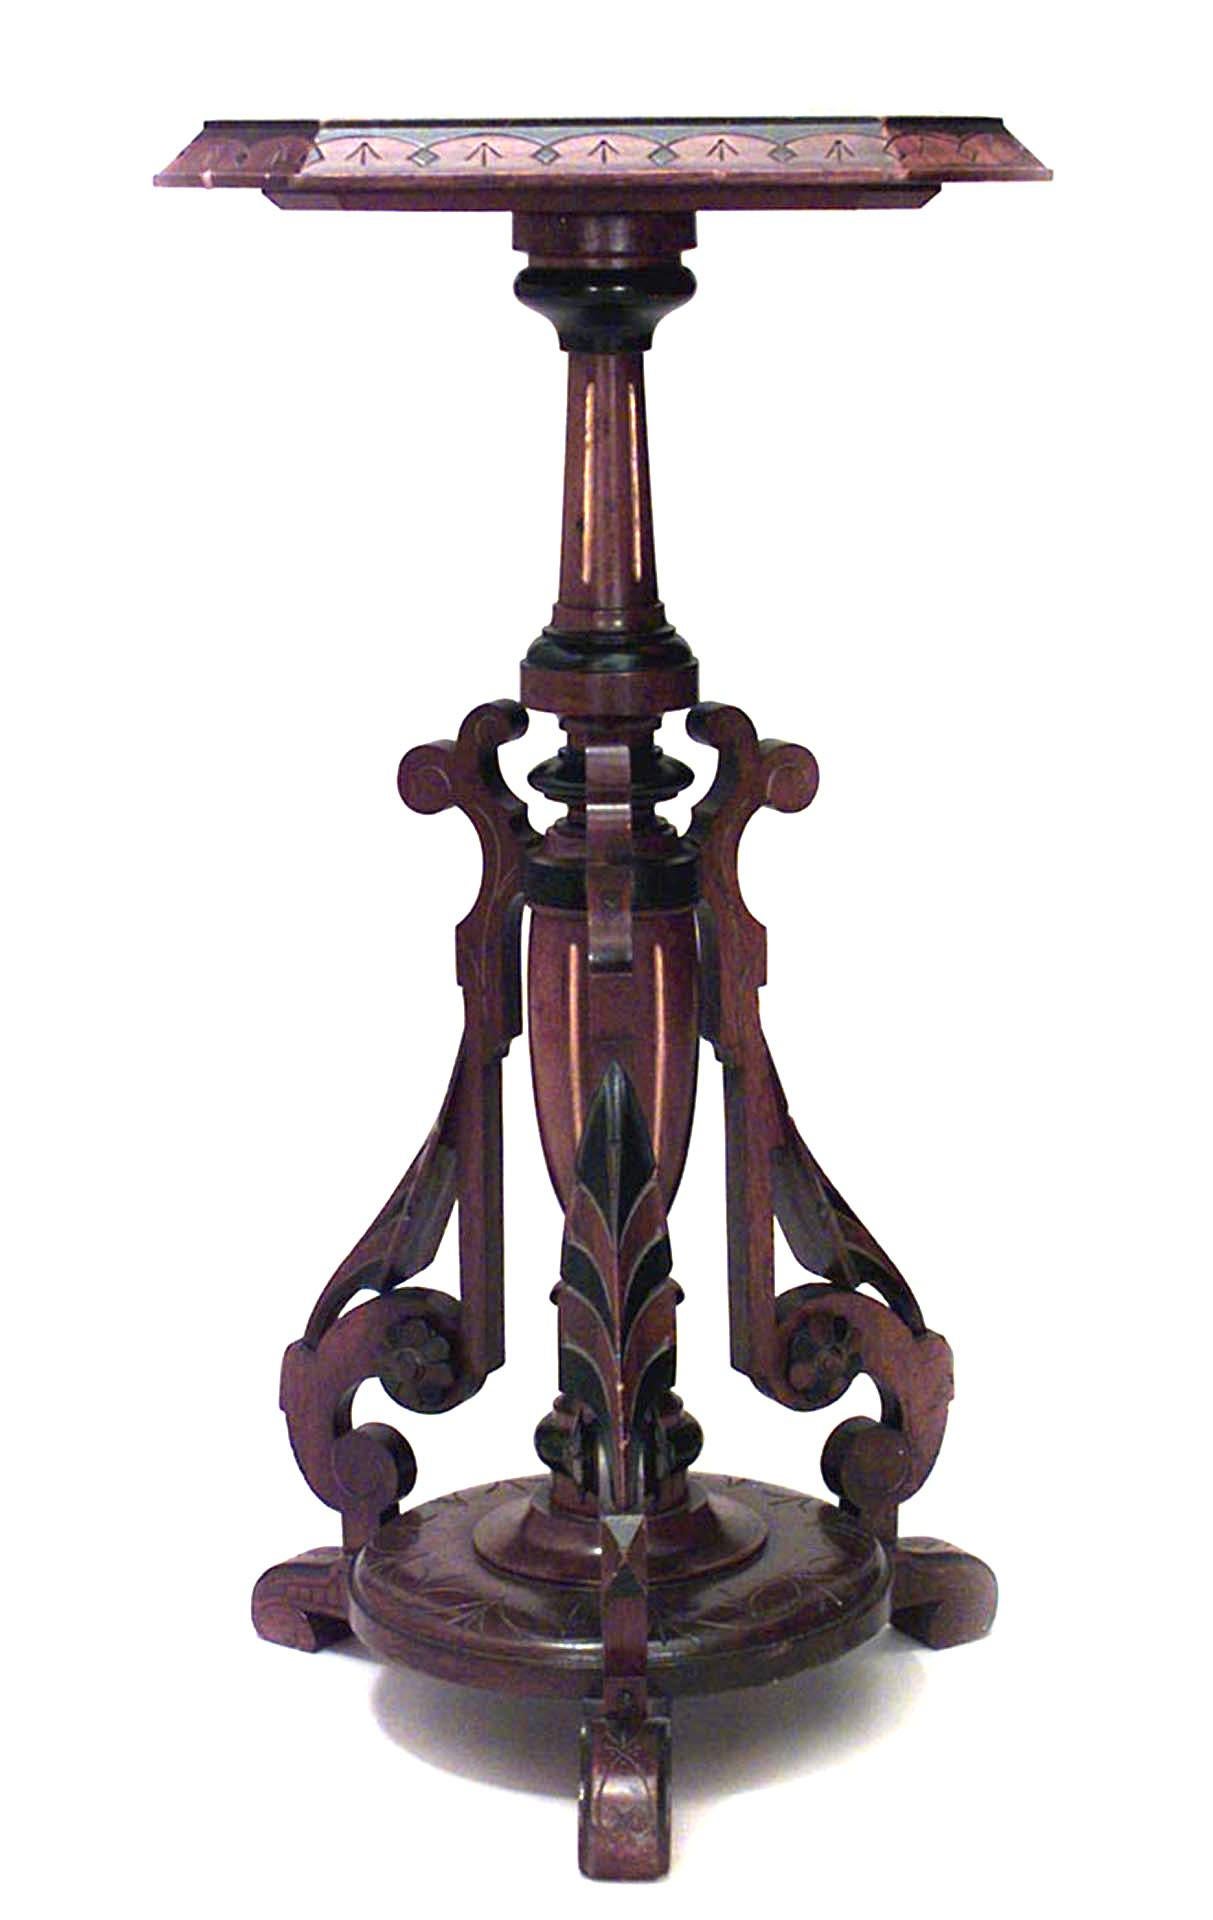 Pair of American Victorian Eastlake walnut pedestals with ebonized and gilt trim and centerpost.
